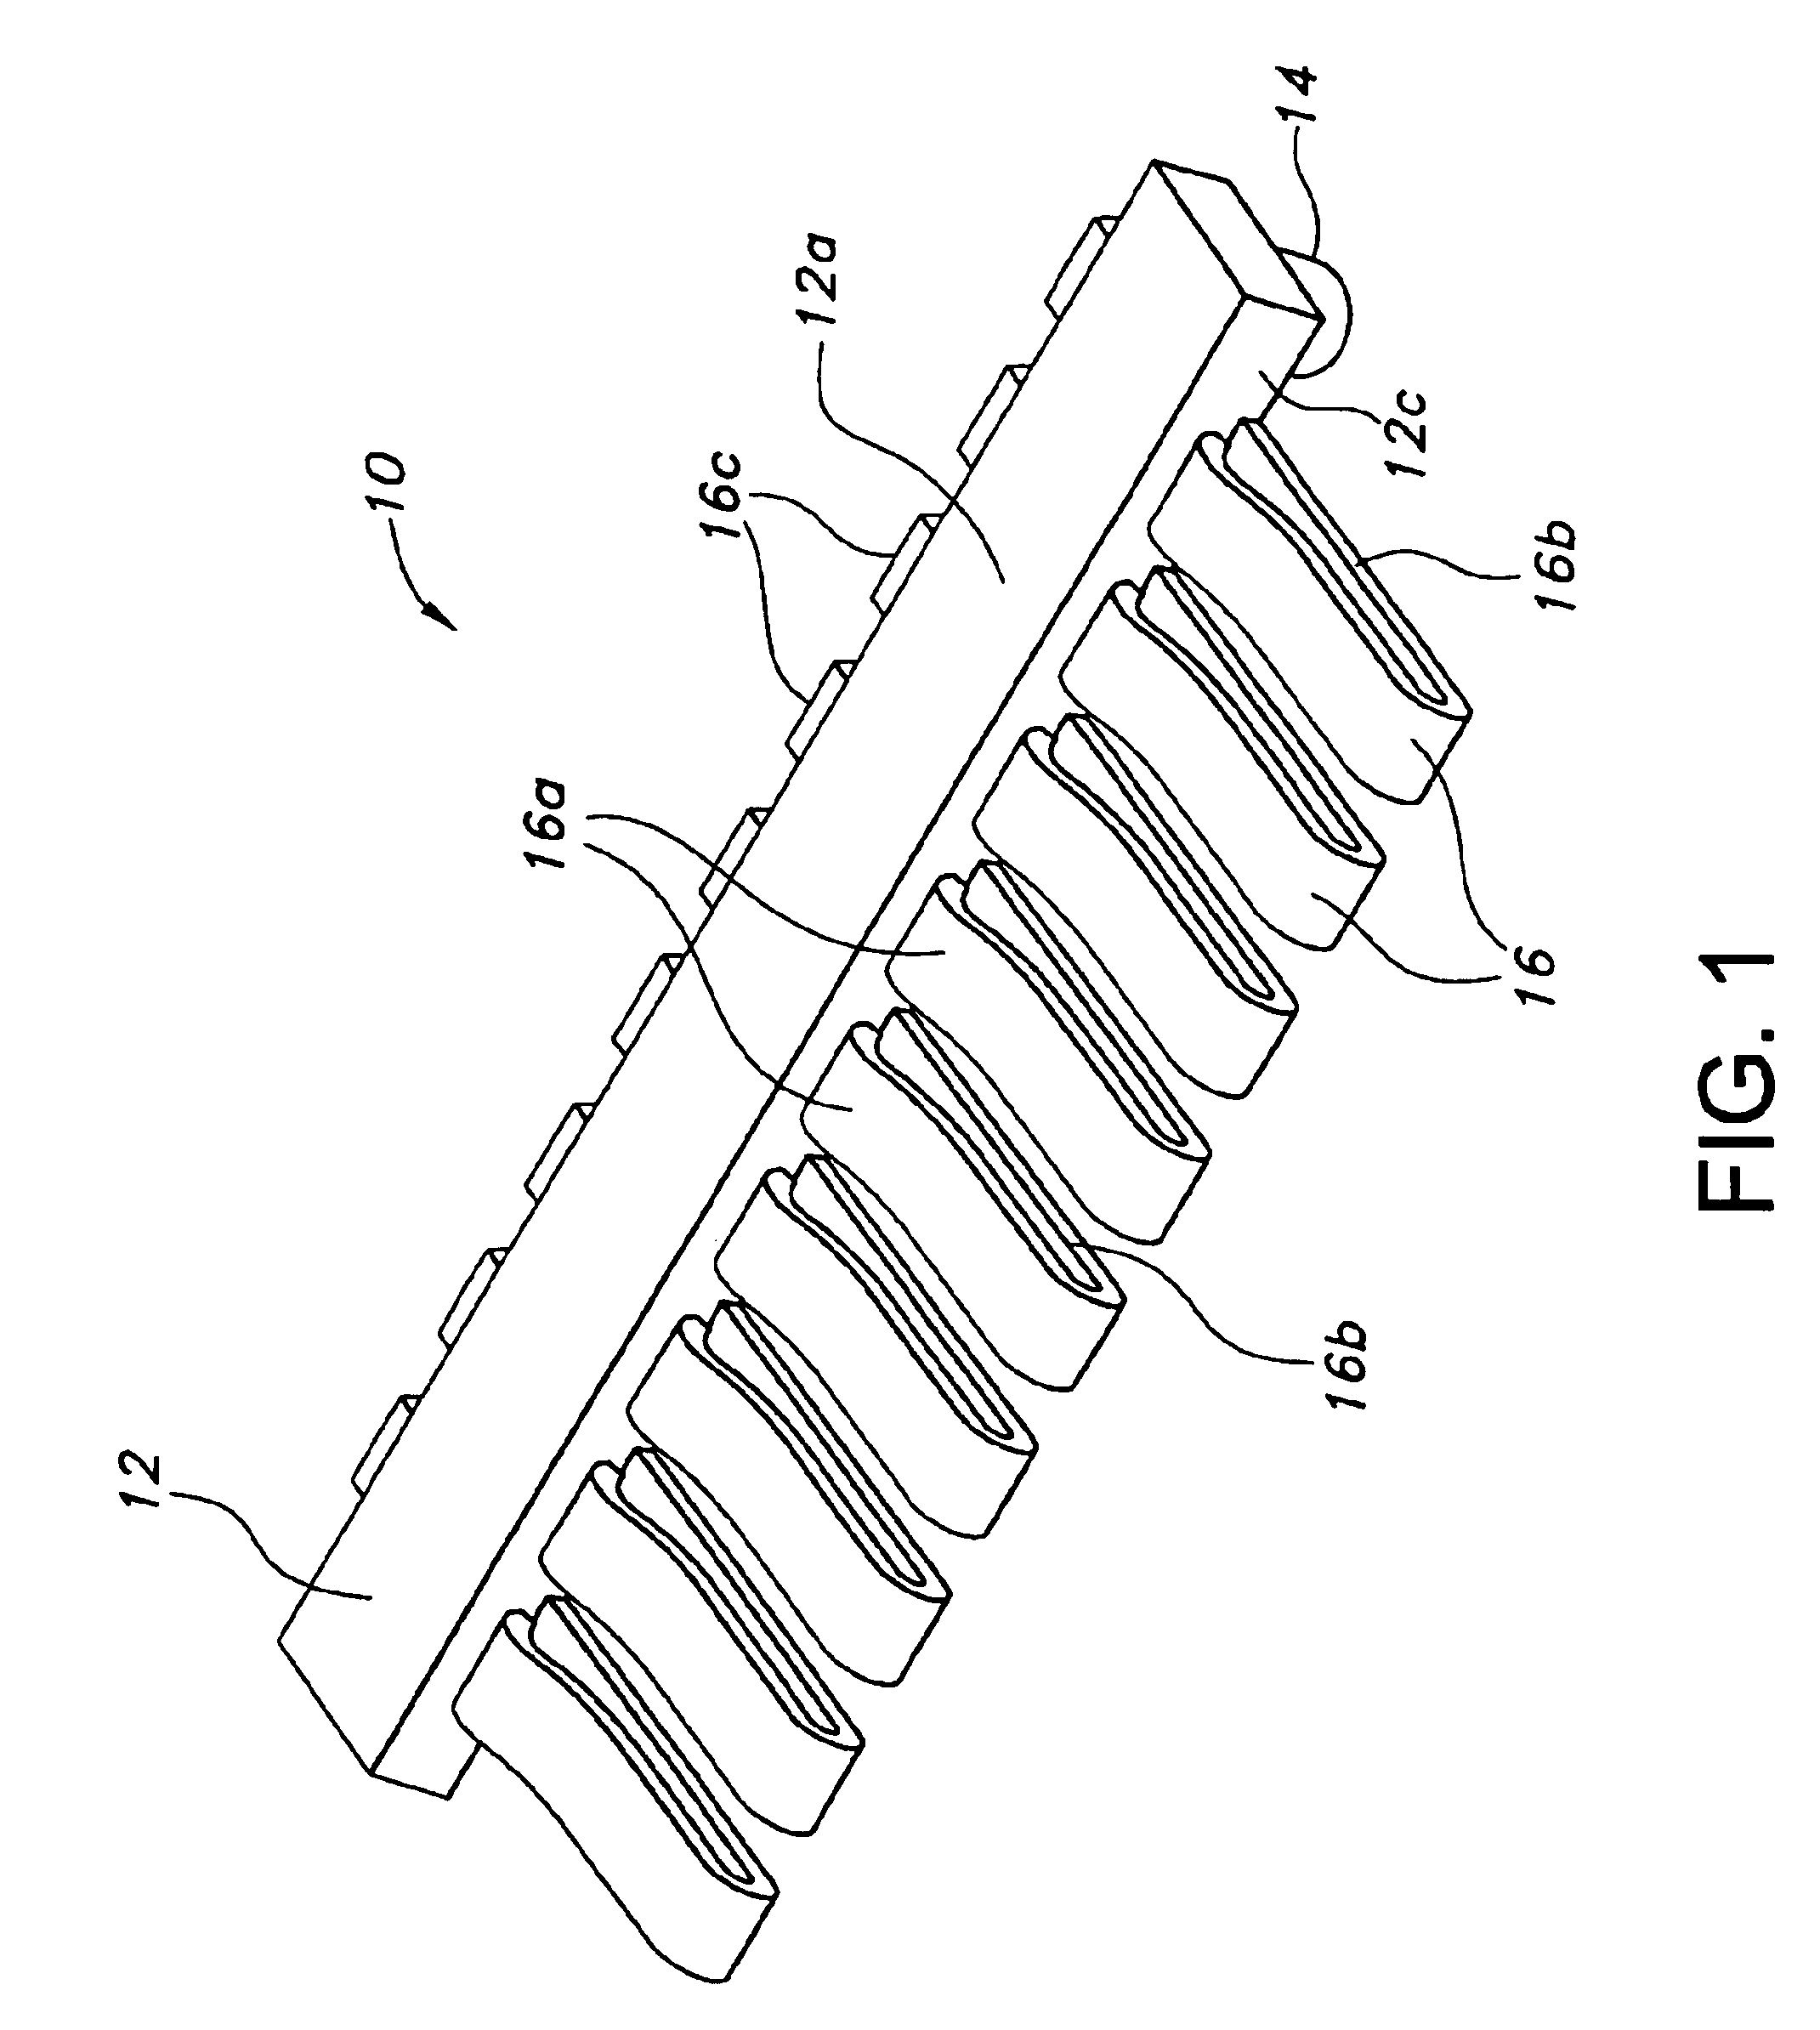 LCD connector for printed circuit boards